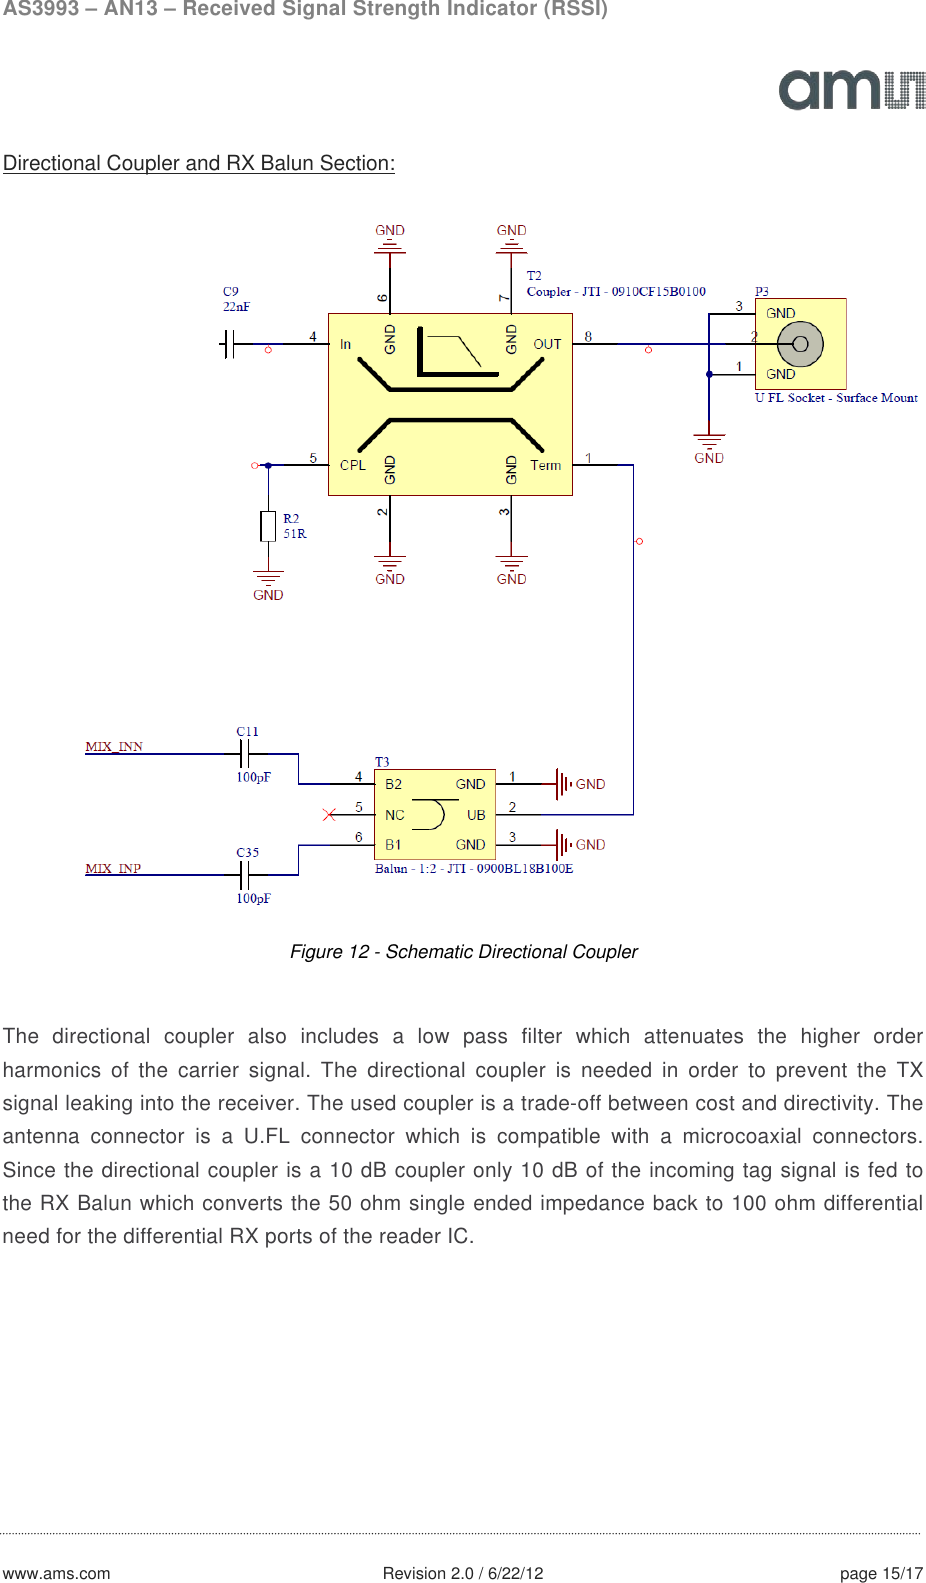 AS3993 – AN13 – Received Signal Strength Indicator (RSSI)  www.ams.com              Revision 2.0 / 6/22/12 page 15/17  Directional Coupler and RX Balun Section:  Figure 12 - Schematic Directional Coupler   The  directional coupler also includes a low pass filter which attenuates the higher order harmonics of the carrier signal. The directional coupler is needed in order to prevent the TX signal leaking into the receiver. The used coupler is a trade-off between cost and directivity. The antenna connector is a U.FL connector which is compatible with a microcoaxial connectors. Since the directional coupler is a 10 dB coupler only 10 dB of the incoming tag signal is fed to the RX Balun which converts the 50 ohm single ended impedance back to 100 ohm differential need for the differential RX ports of the reader IC.   